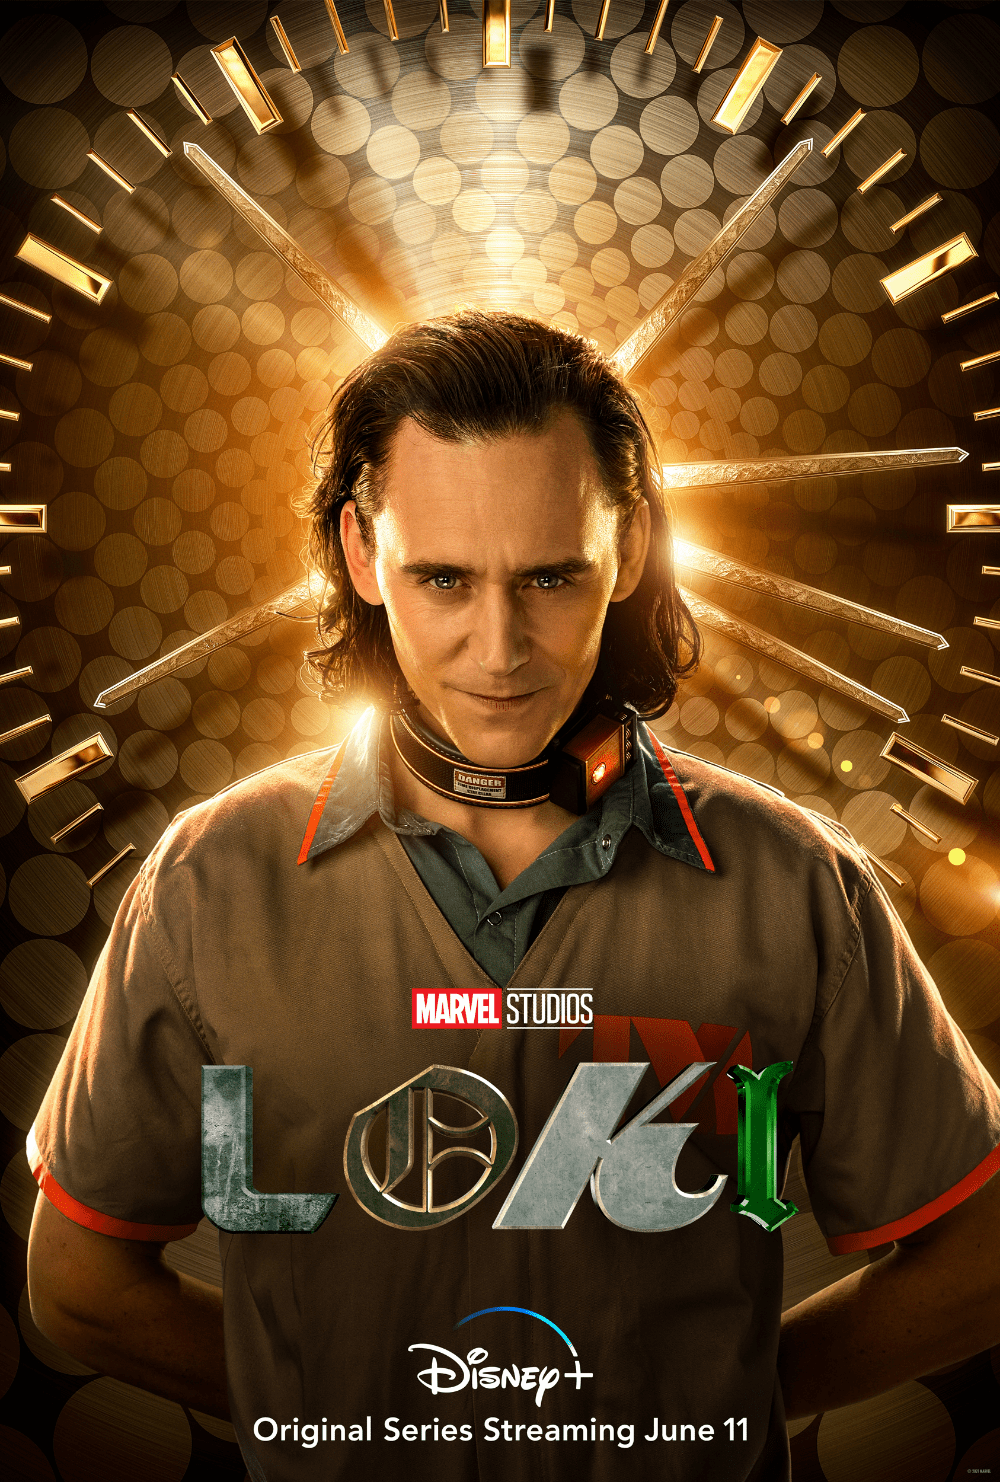 Loki Poster and Trailer